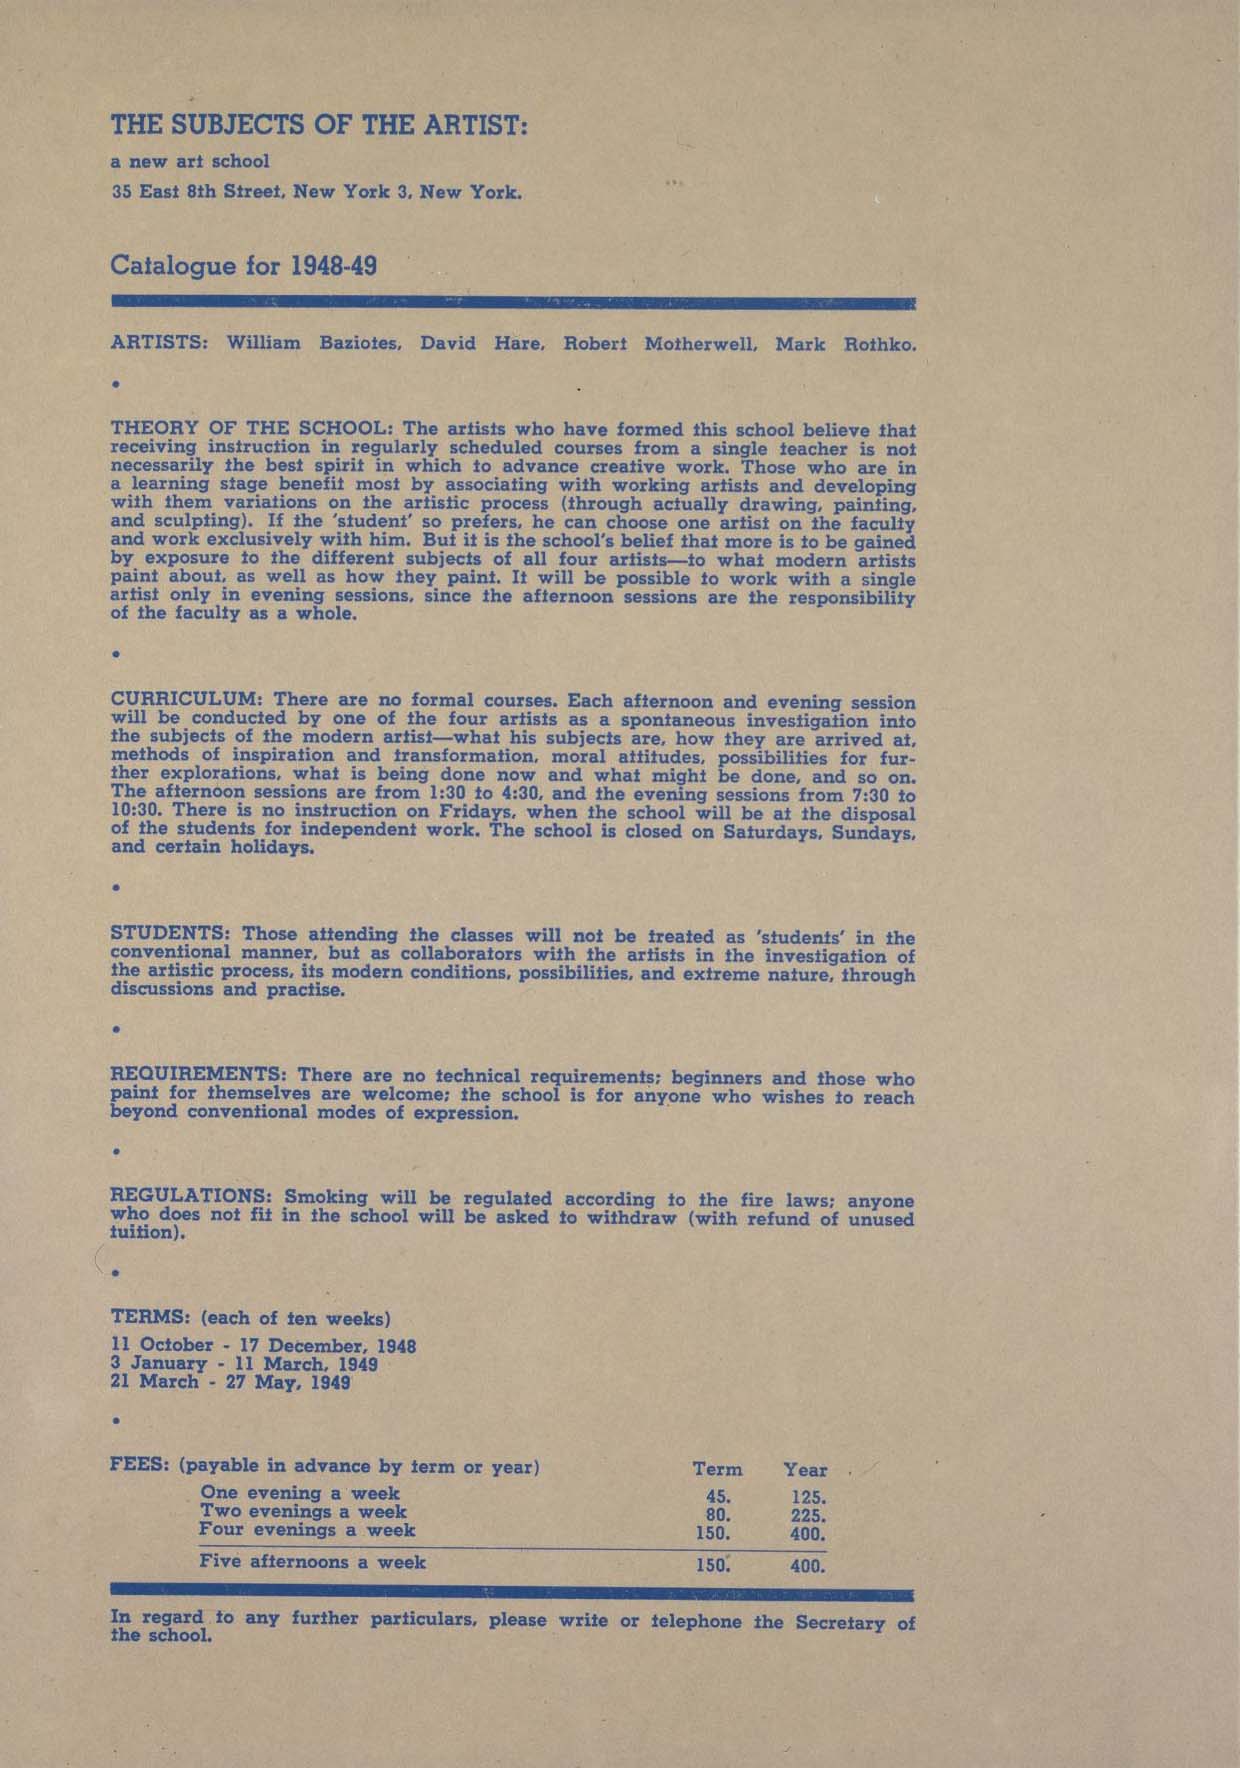 Poster announcing The Subjects of the Artist school, 1948